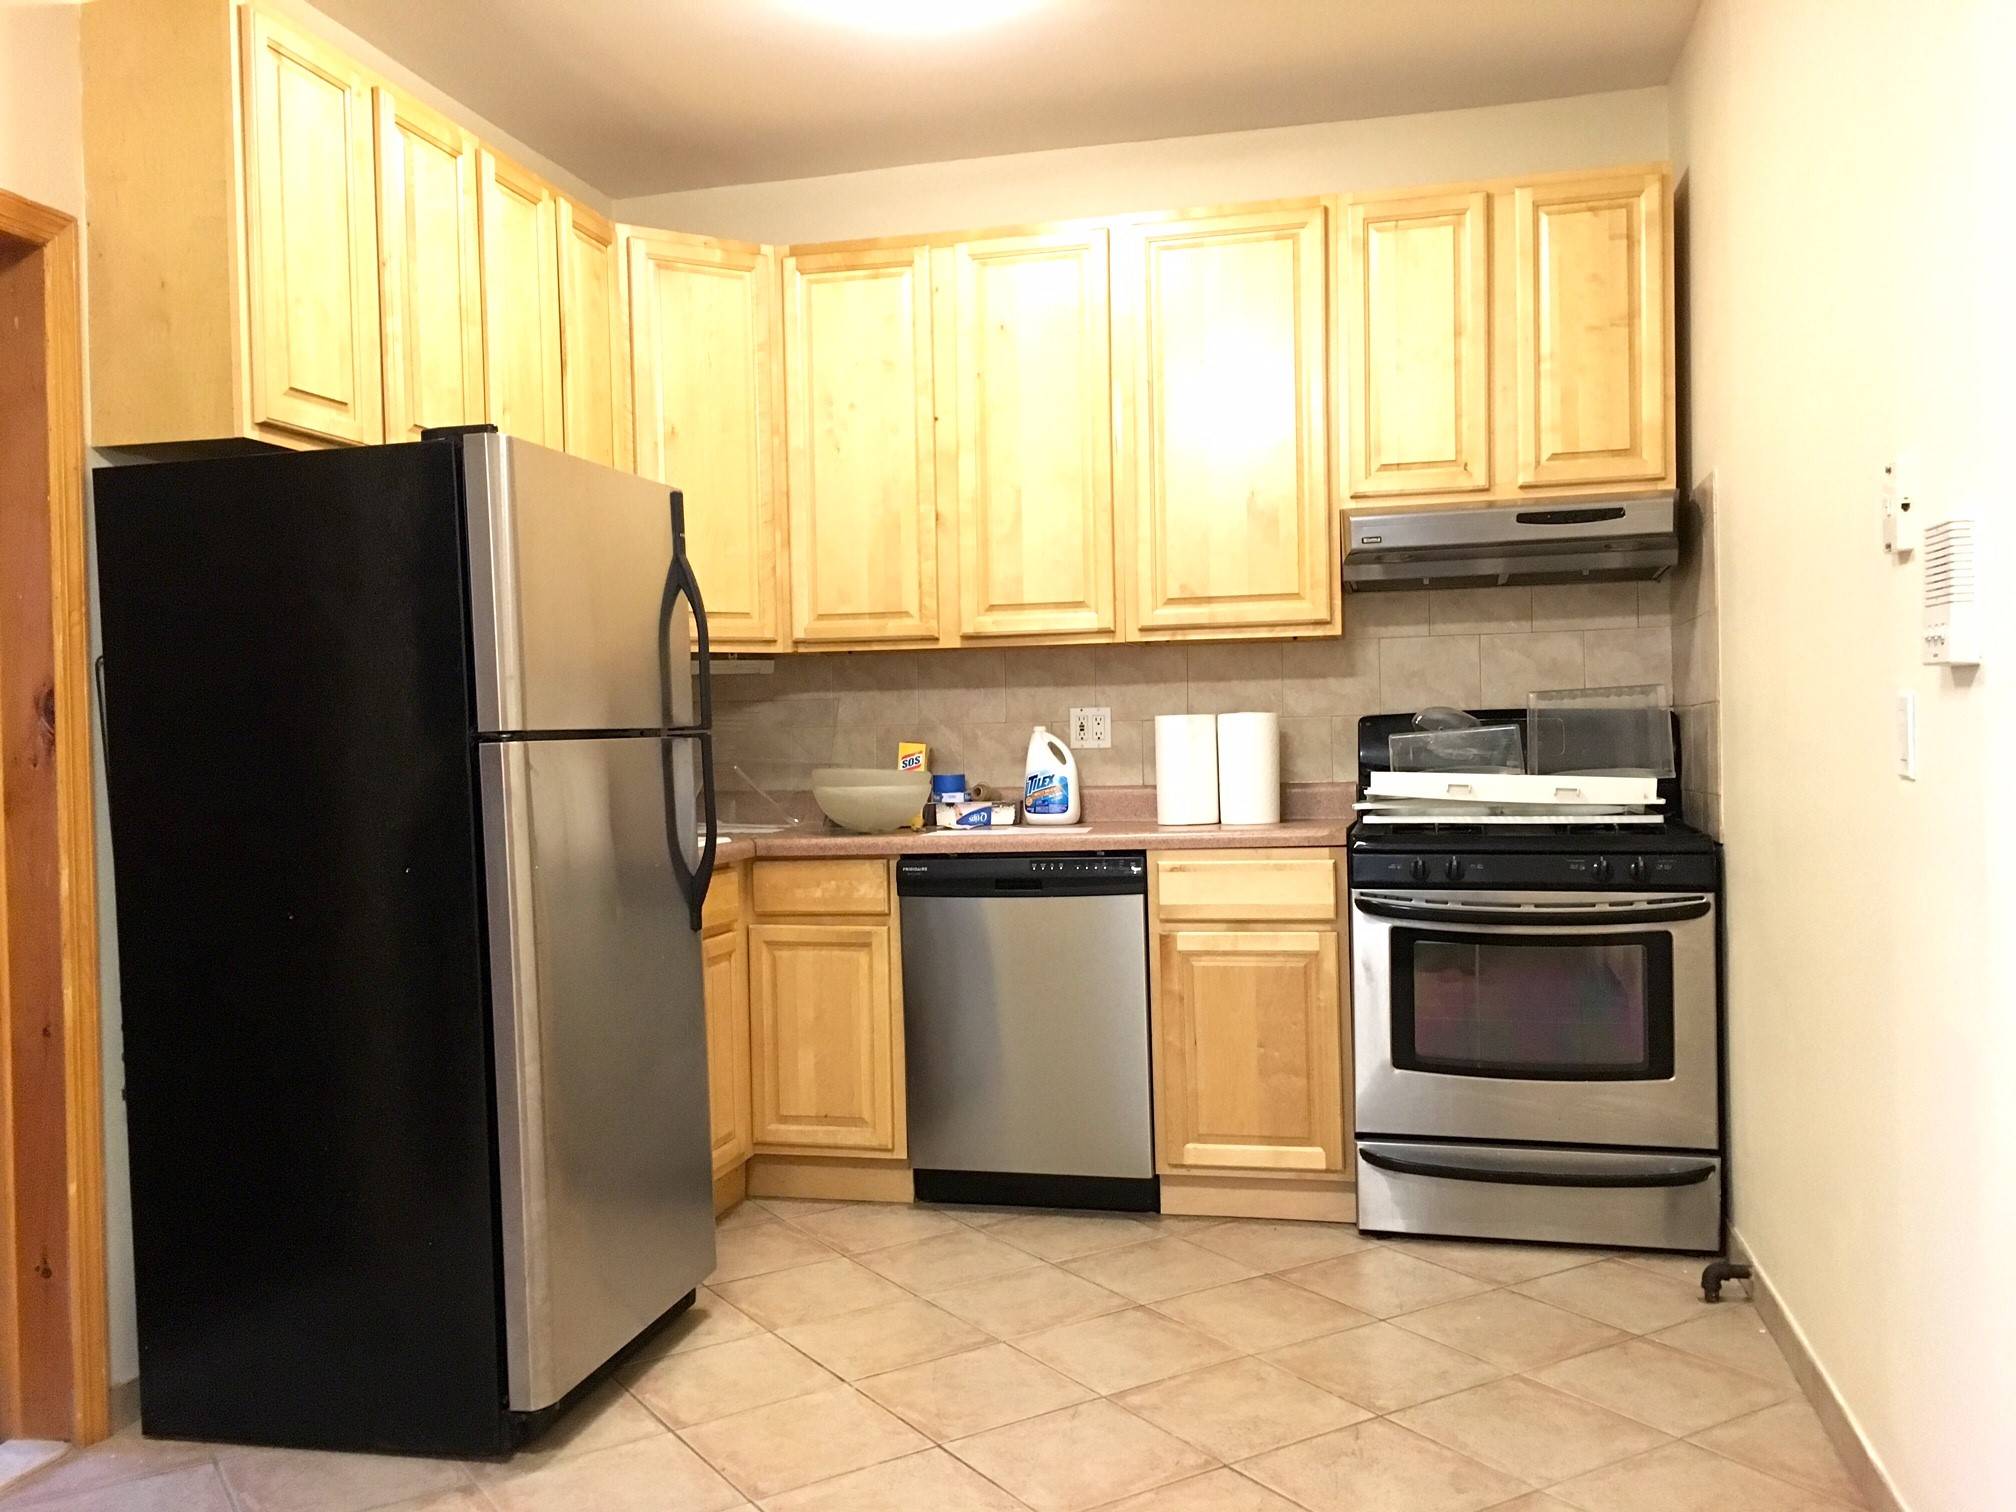 Astoria: 2 Queen Sized Bedrooms for Rent Off 30th Ave with Dishwasher!